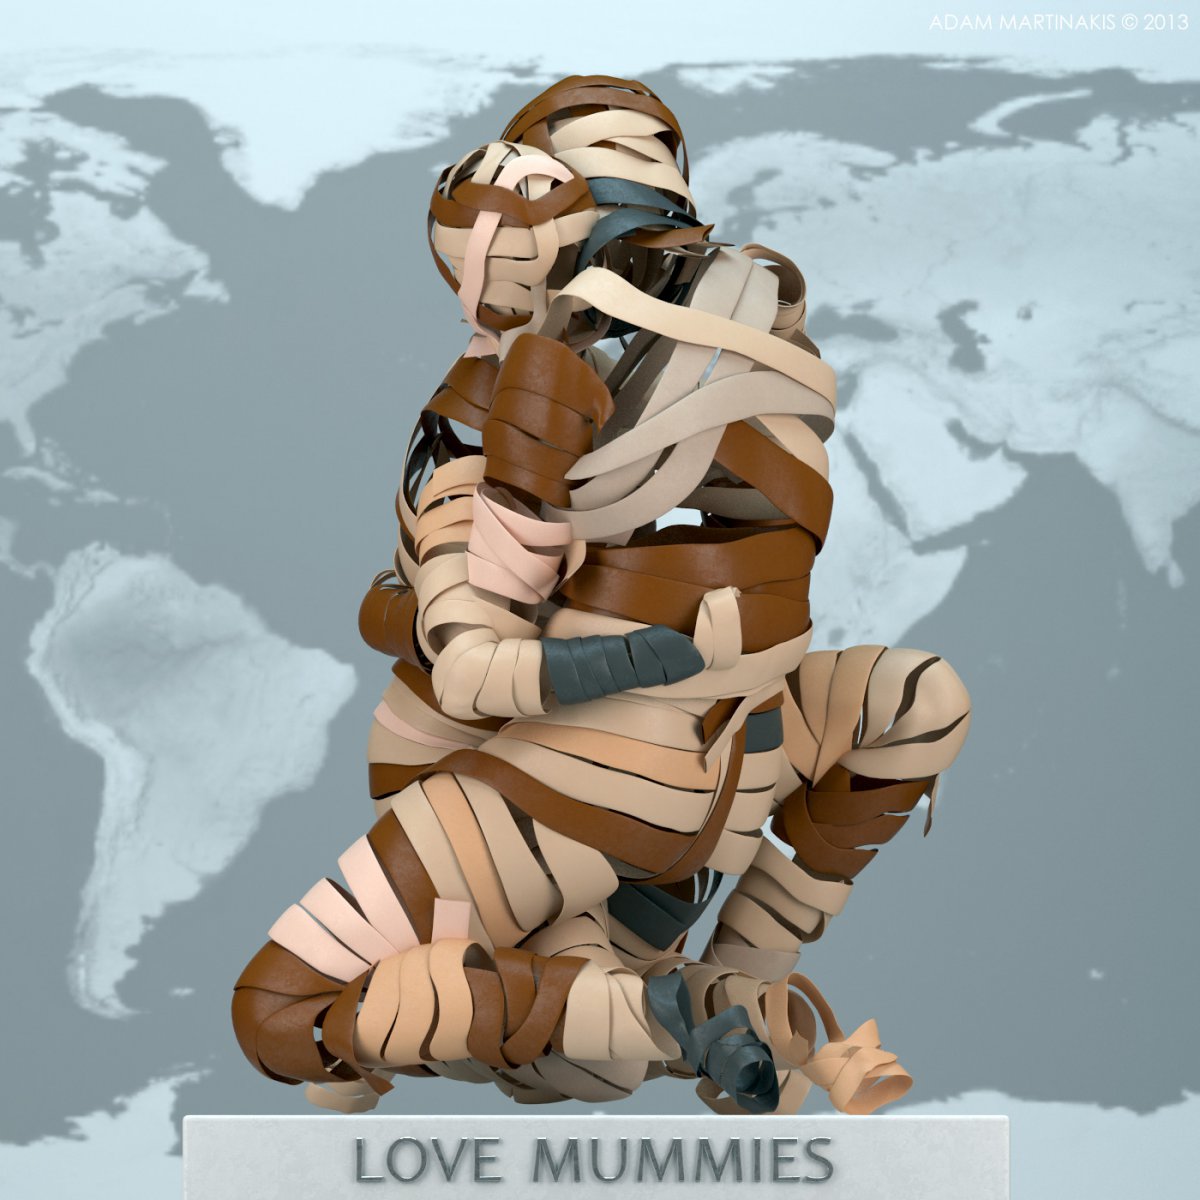 It doens´t matter which skin Color you wear, everyone can become a Mummy! - LOVE MUMMIES - Adam Martinakis